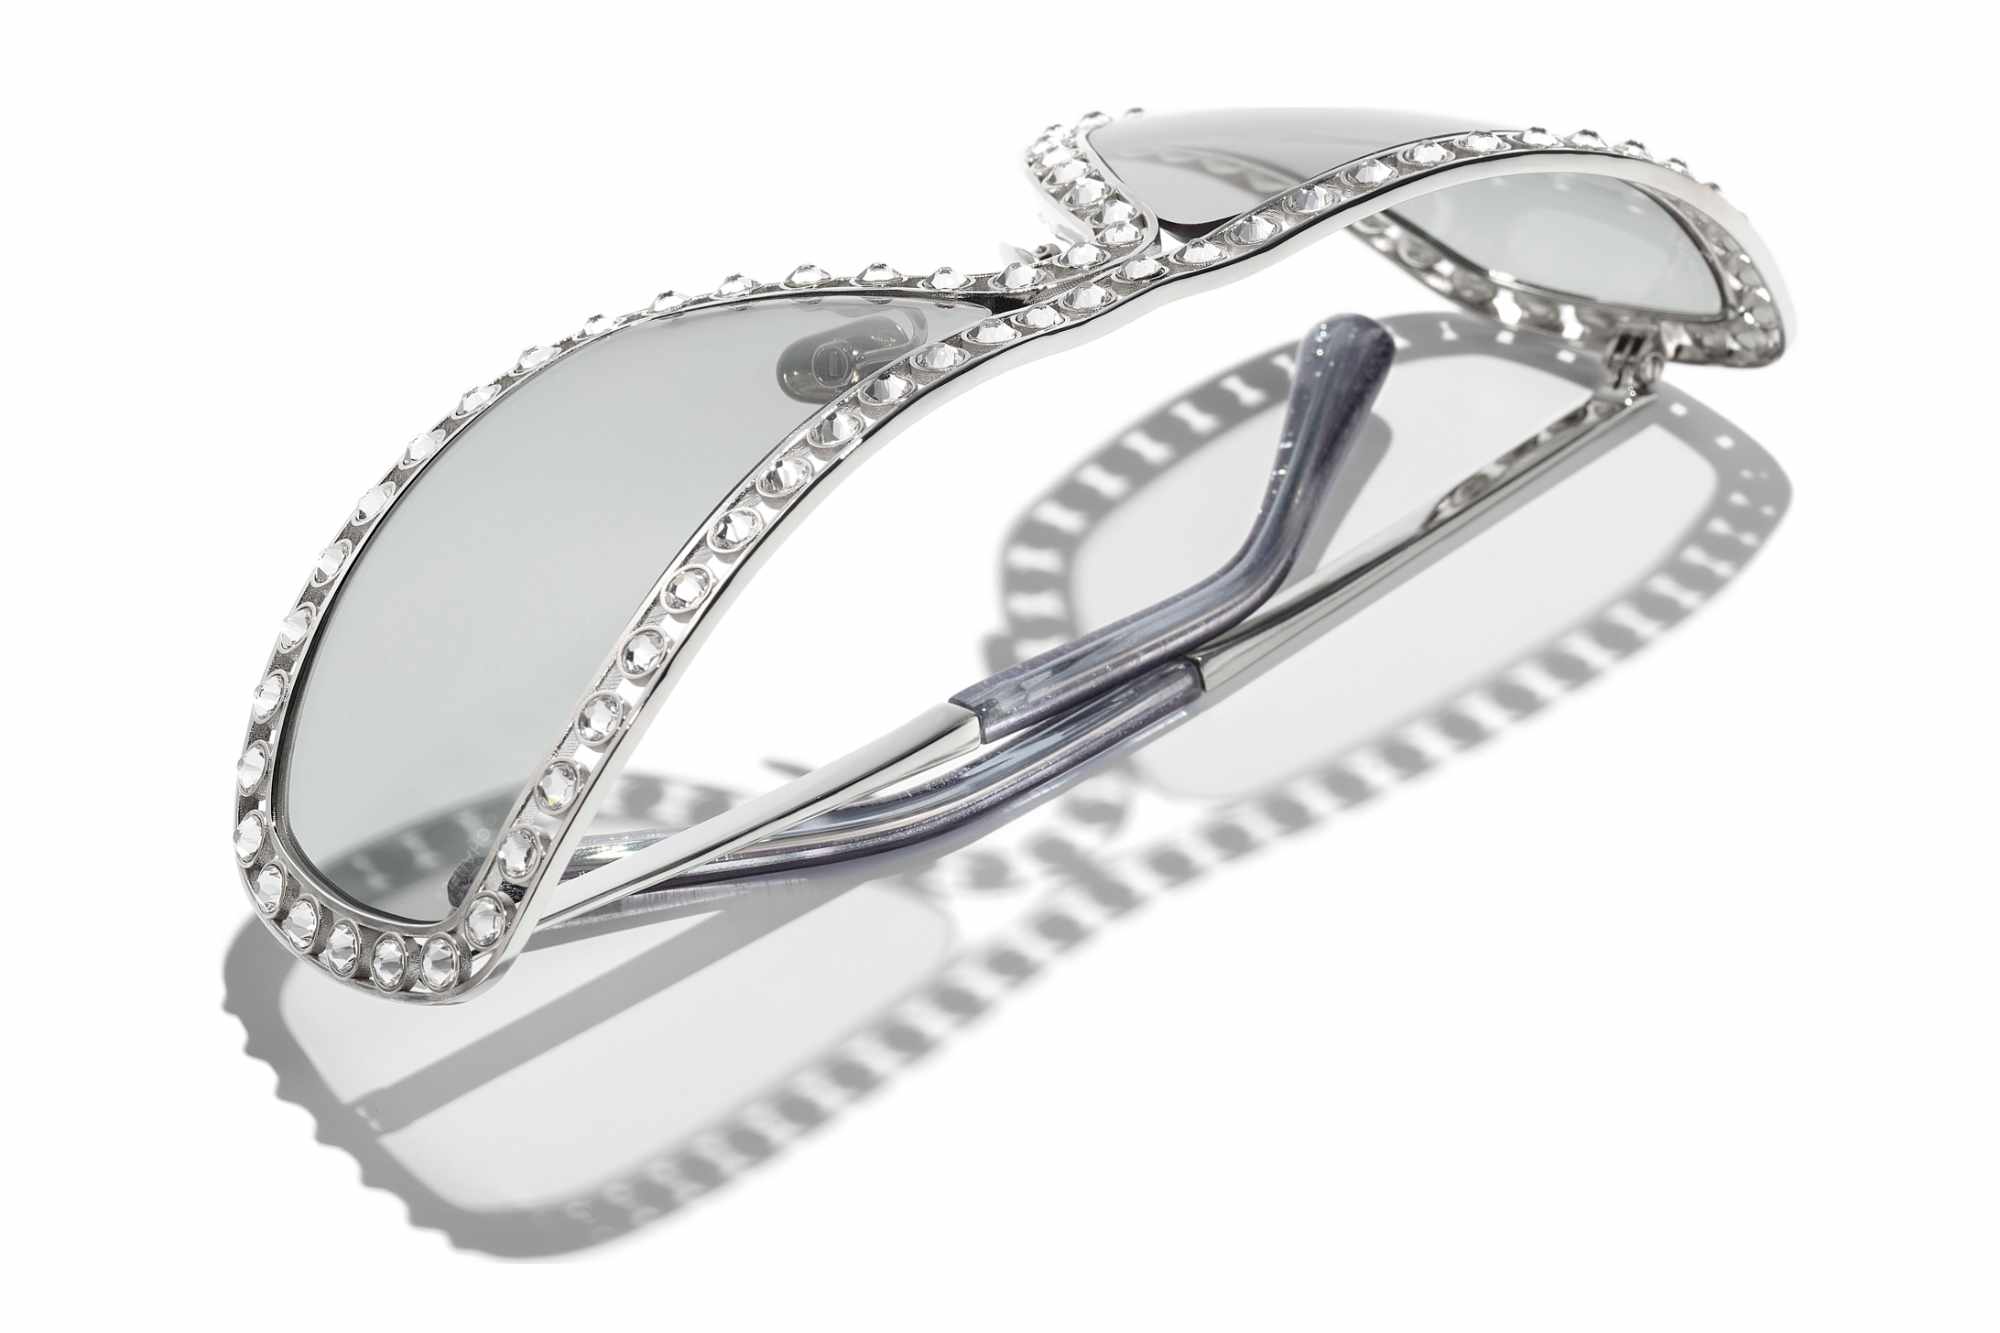 An angled photograph of Chanel's crystal shield sunglasses